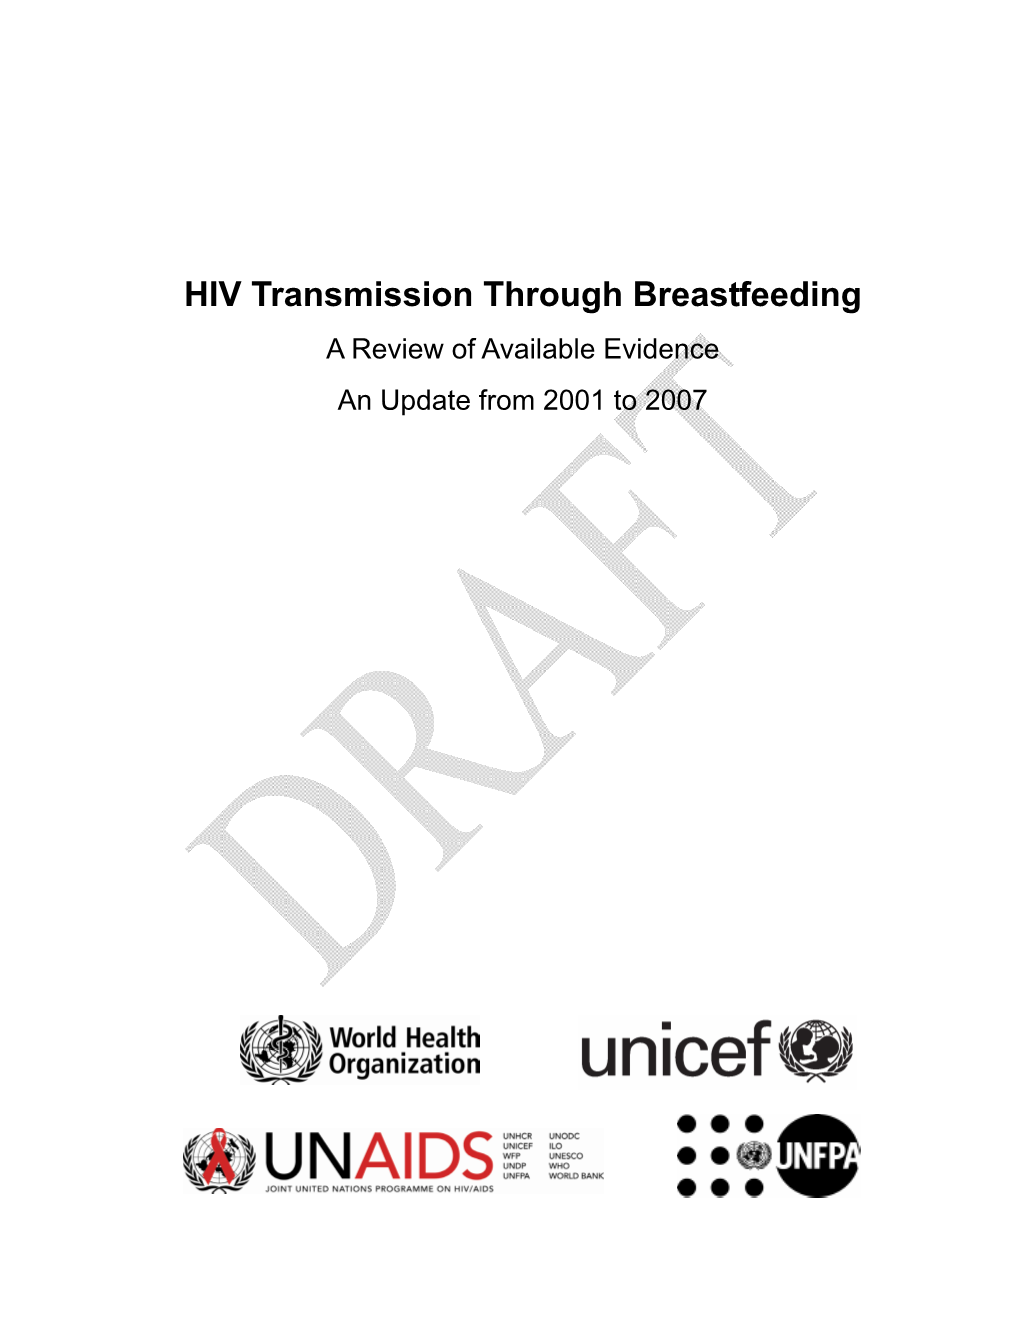 HIV Transmission Through Breastfeeding a Review of Available Evidence an Update from 2001 to 2007